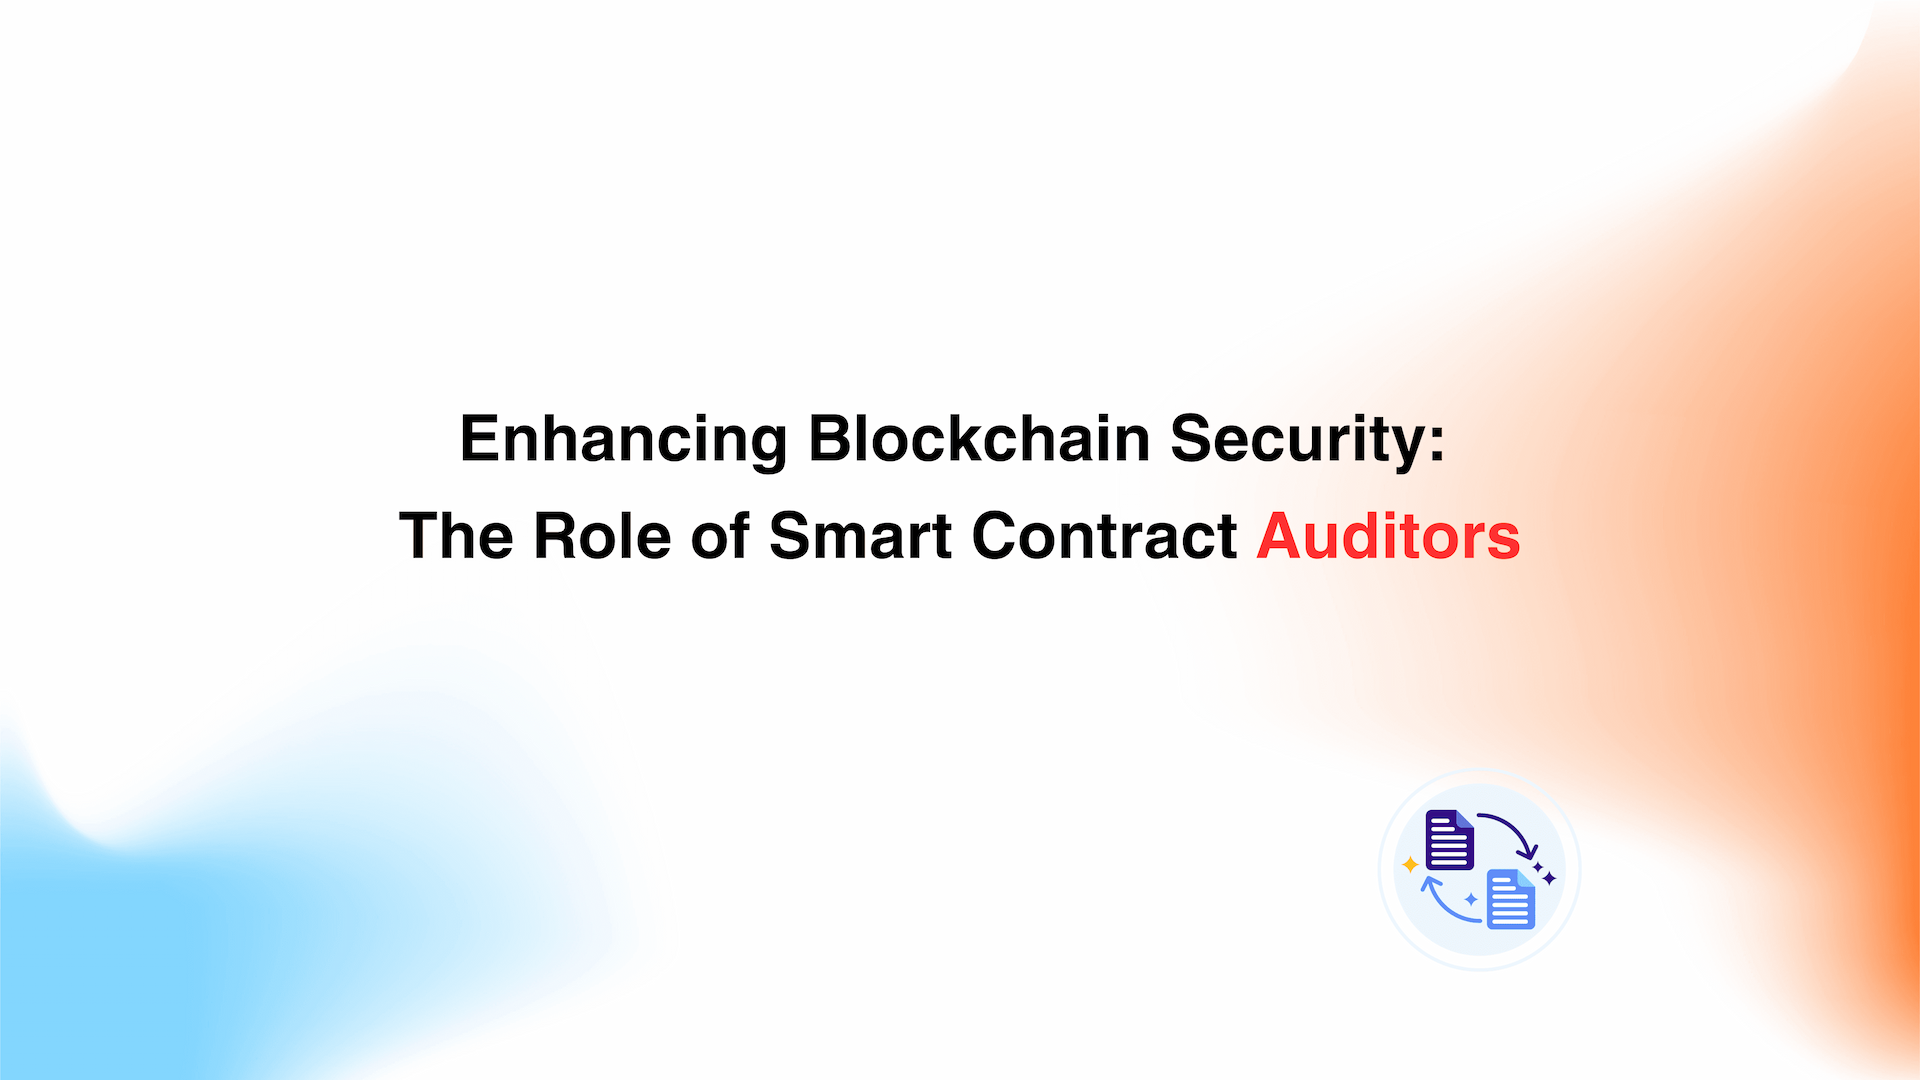 Enhancing Blockchain Security: The Role of Smart Contract Auditors